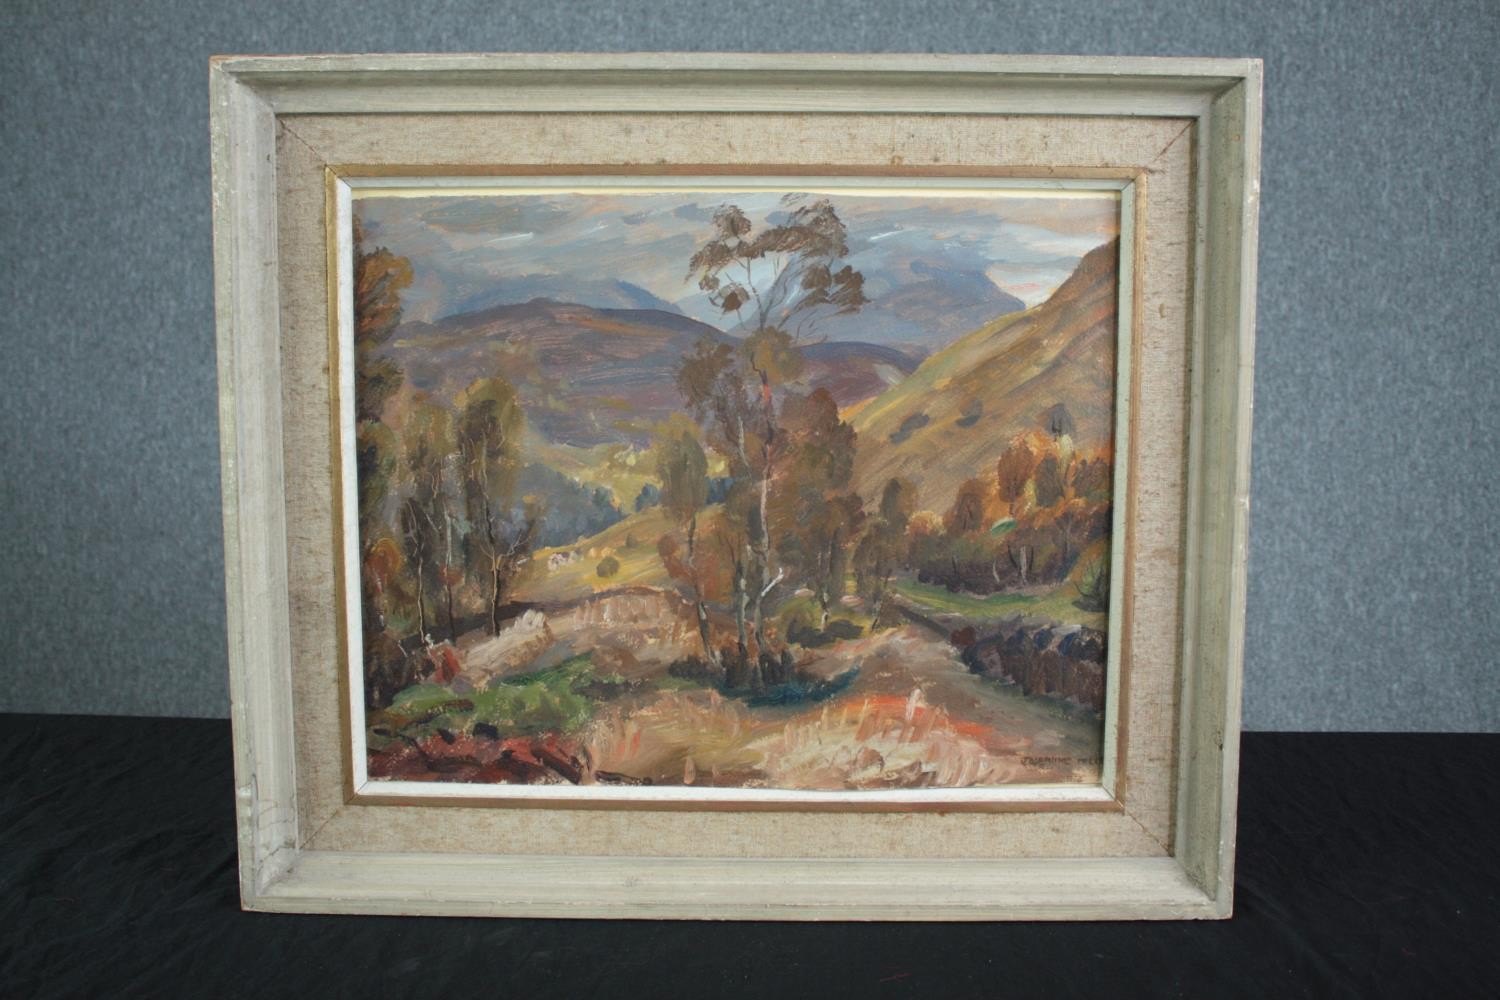 Josephine Haswell Miller (1890-1975). Oil painting on board. Landscape. Signed bottom right. - Image 2 of 4